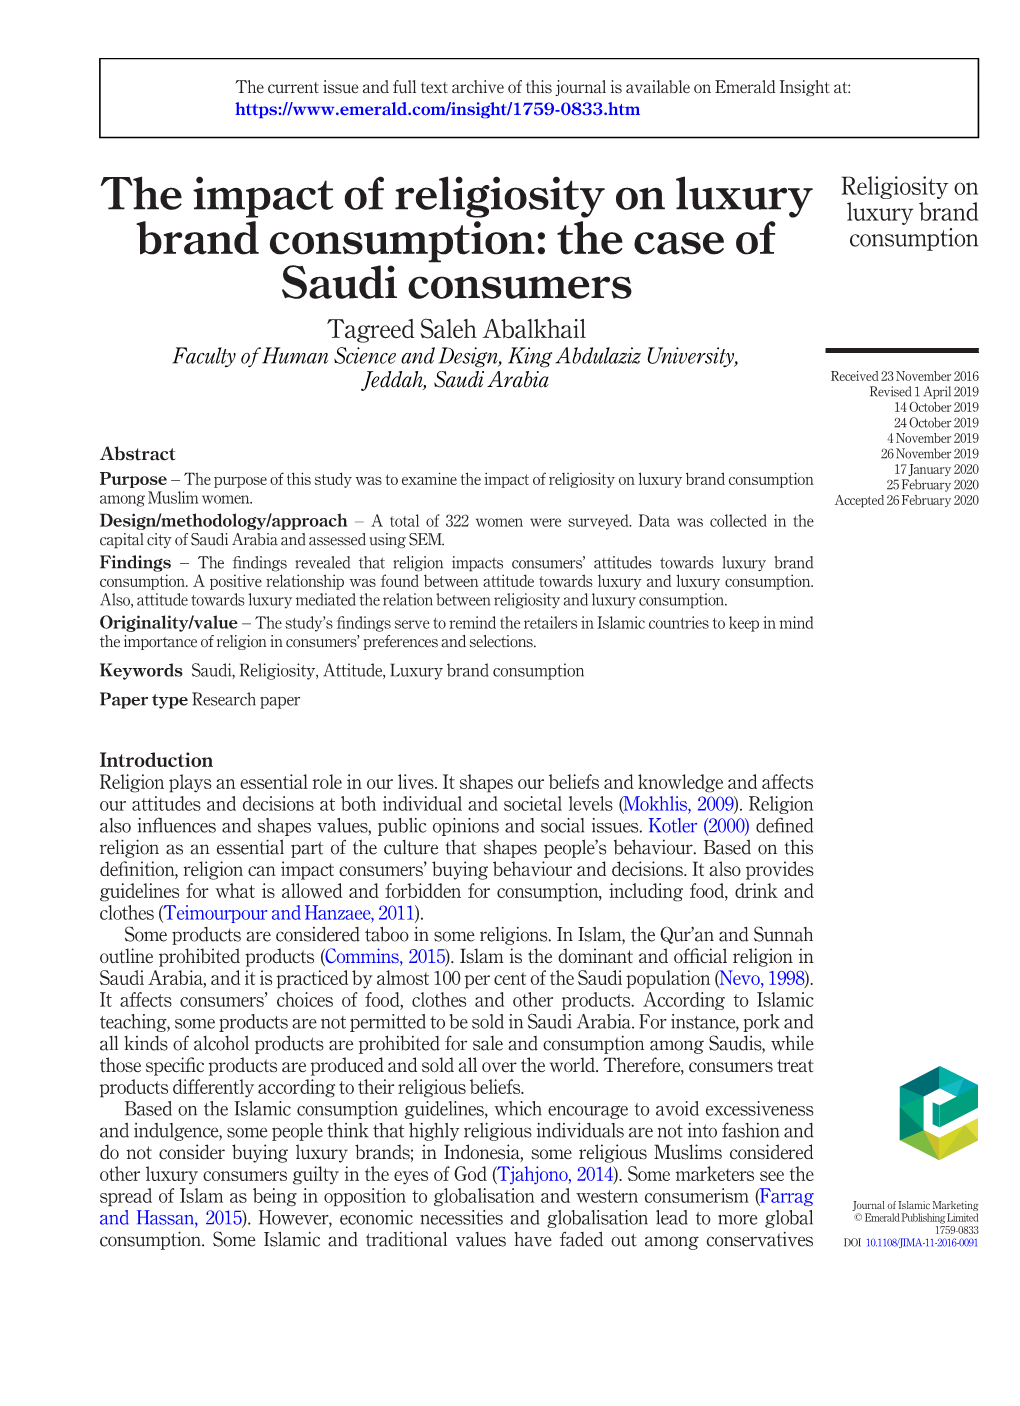 The Impact of Religiosity on Luxury Brand Consumption: the Case Of